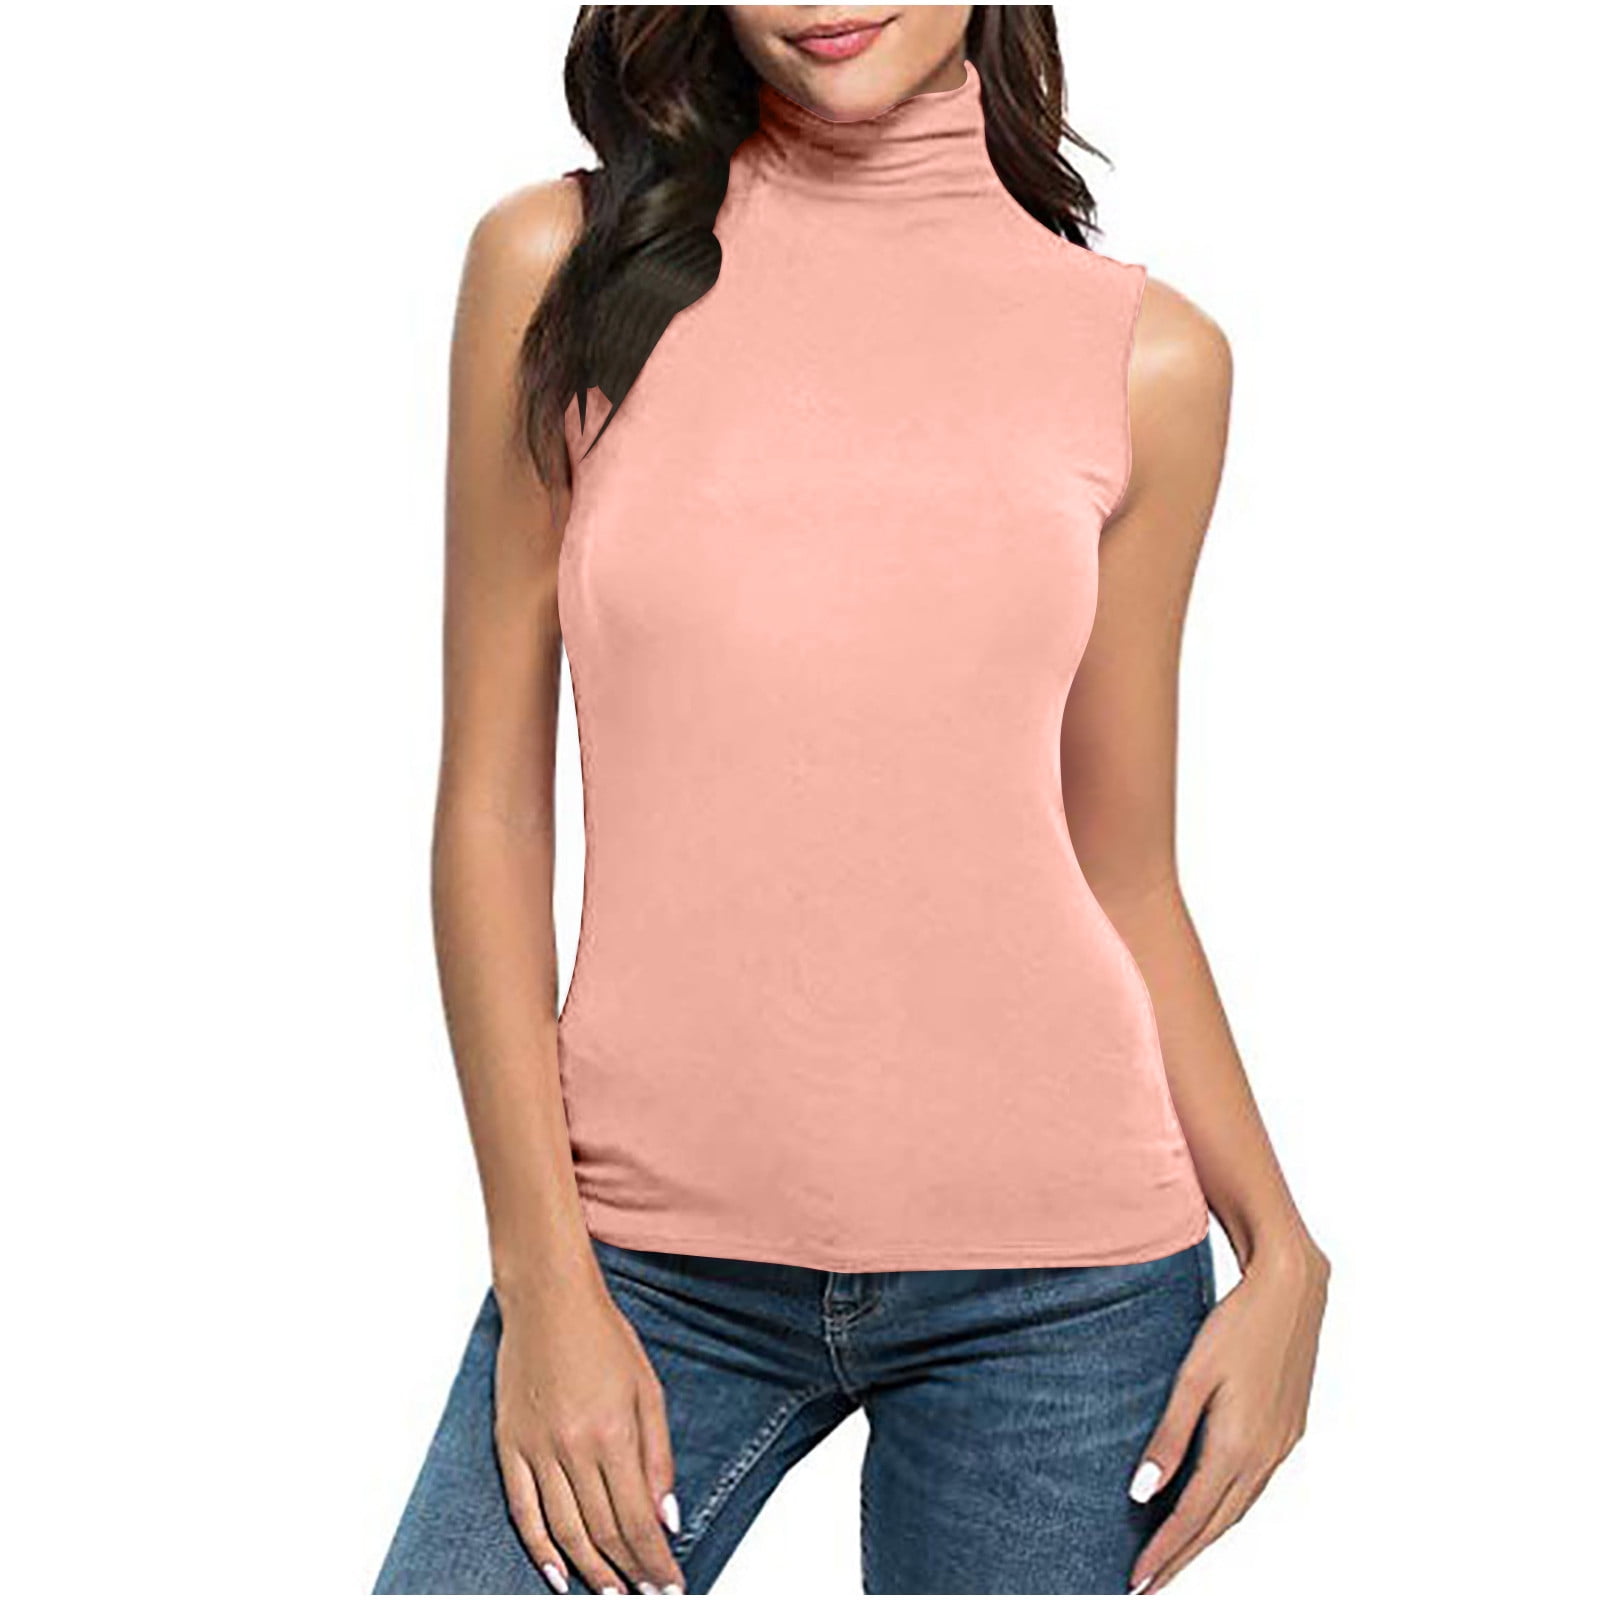 Womens Sleeveless Ruched Mock Turtleneck Tank Tops Slim Fitted Blouse ...